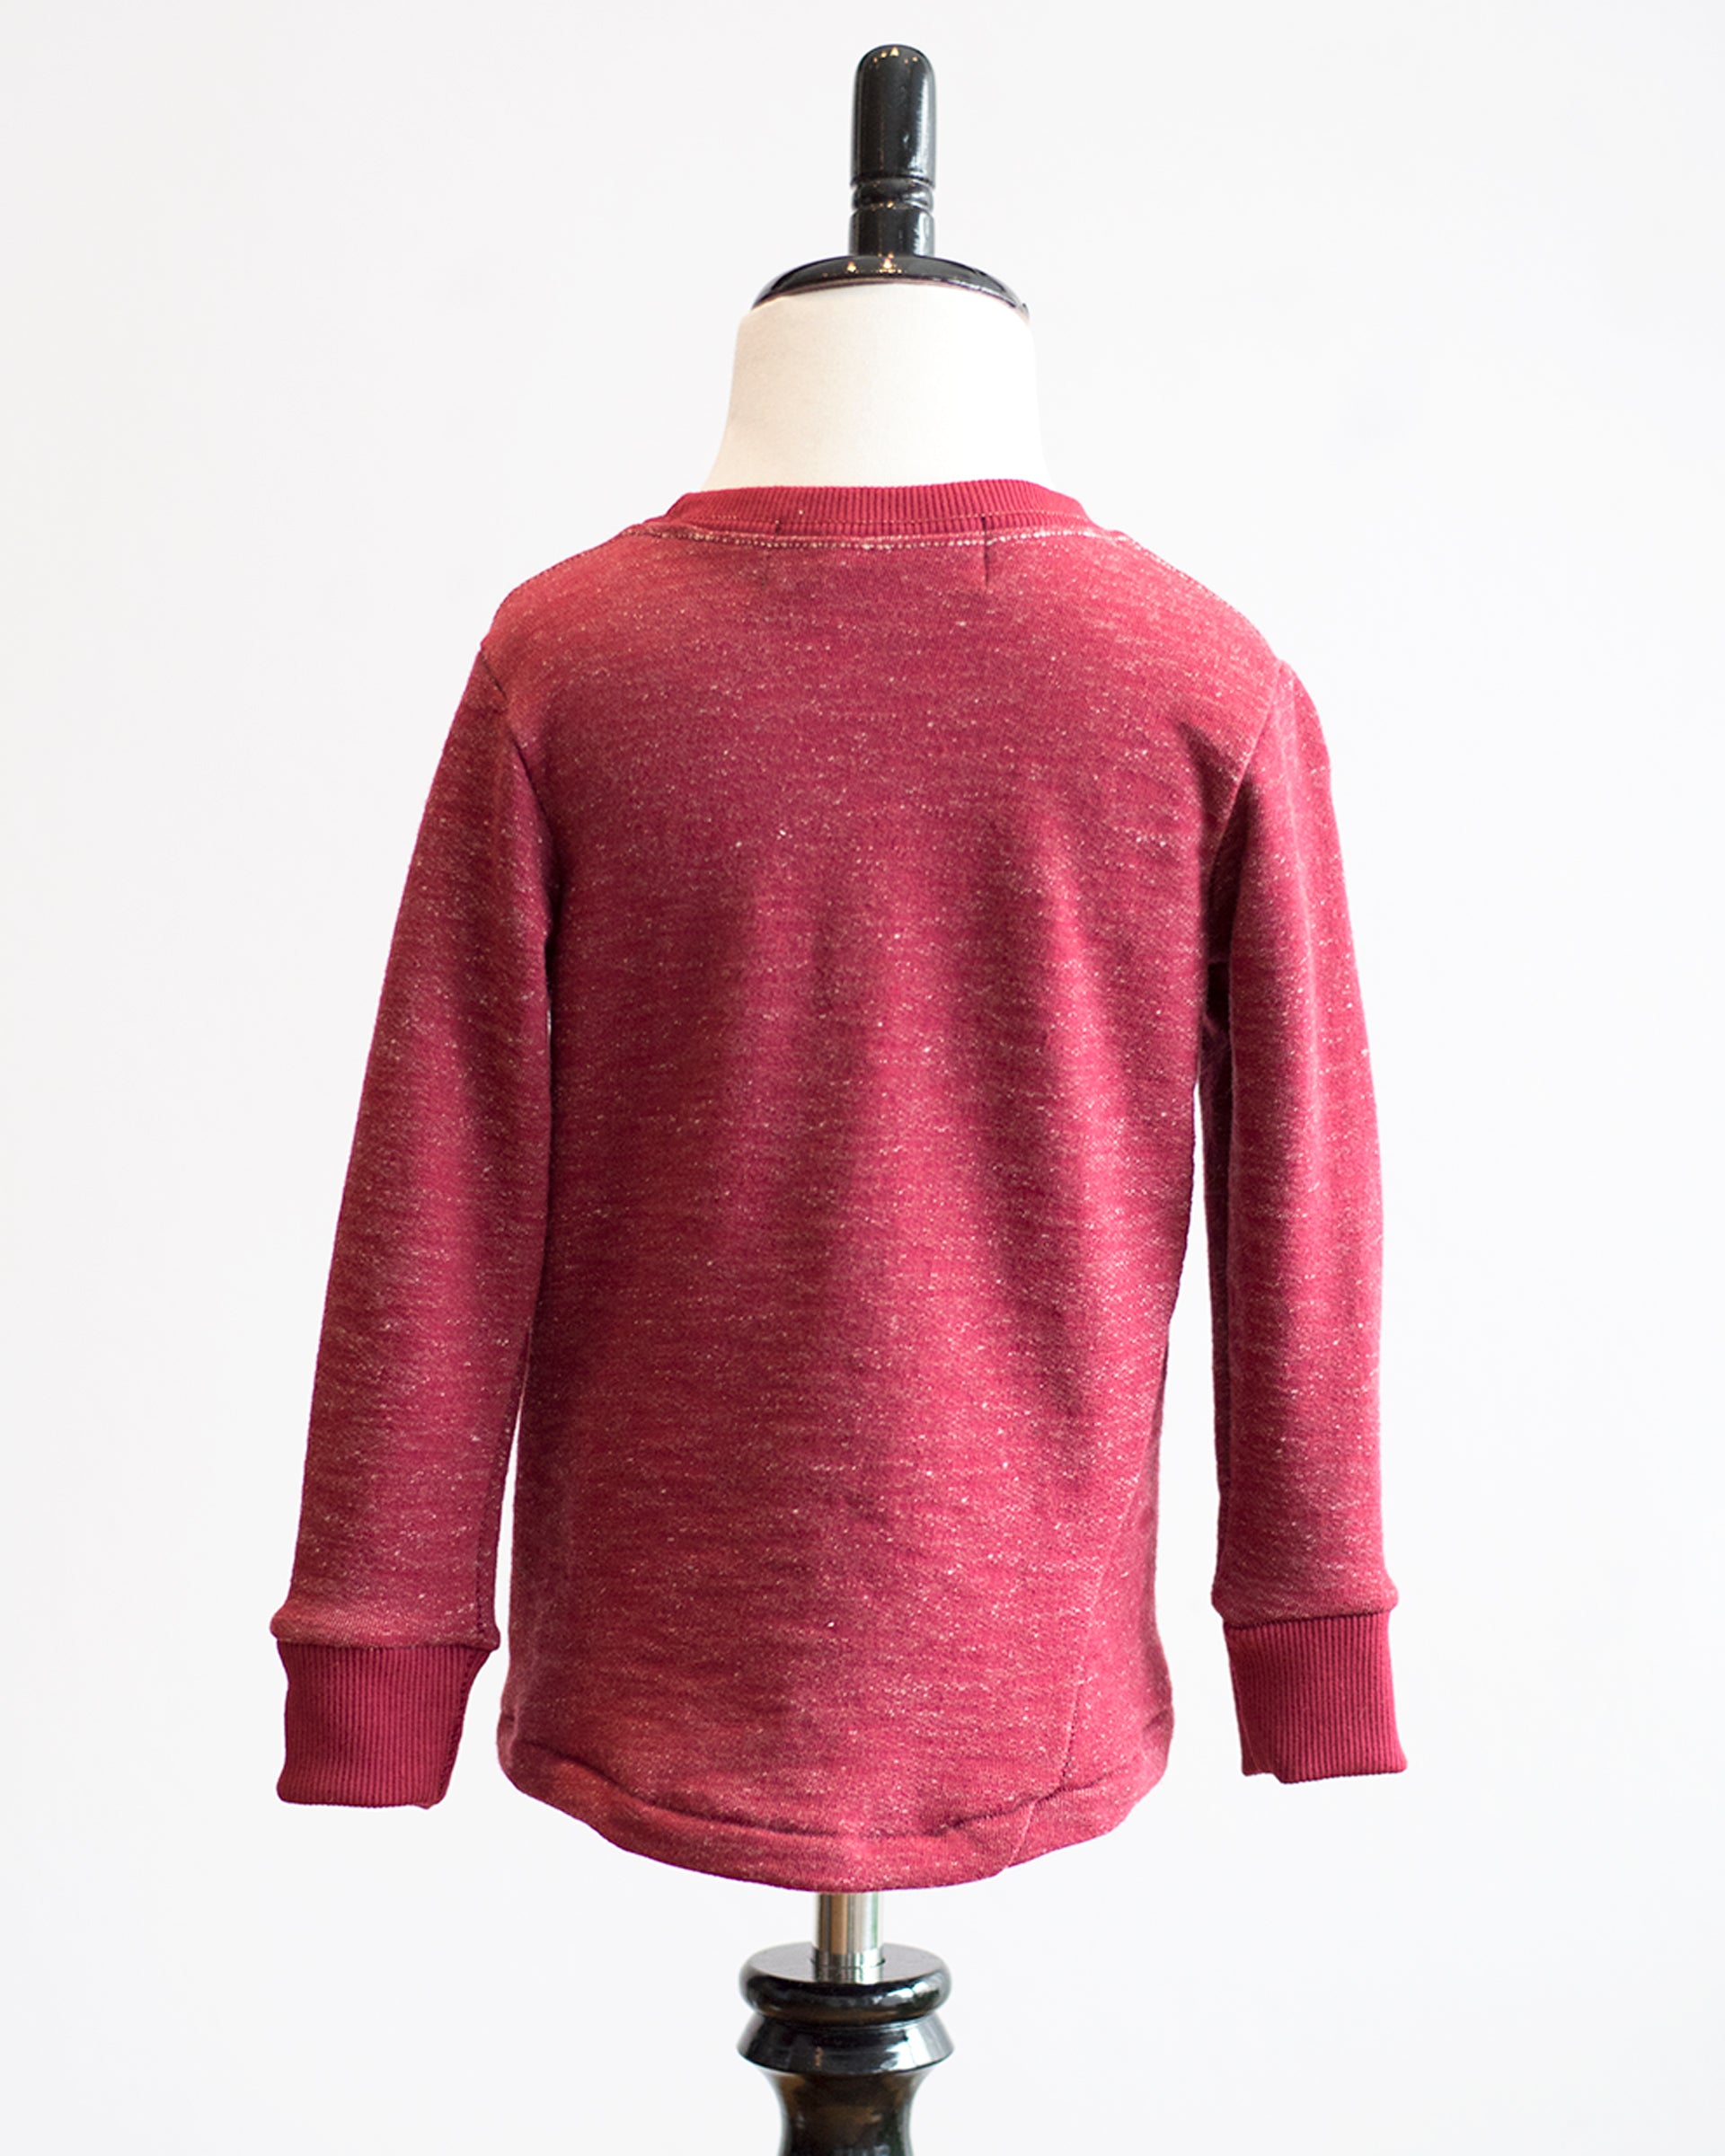 Kids Maroon French Terry Long Sleeve Shirt - back